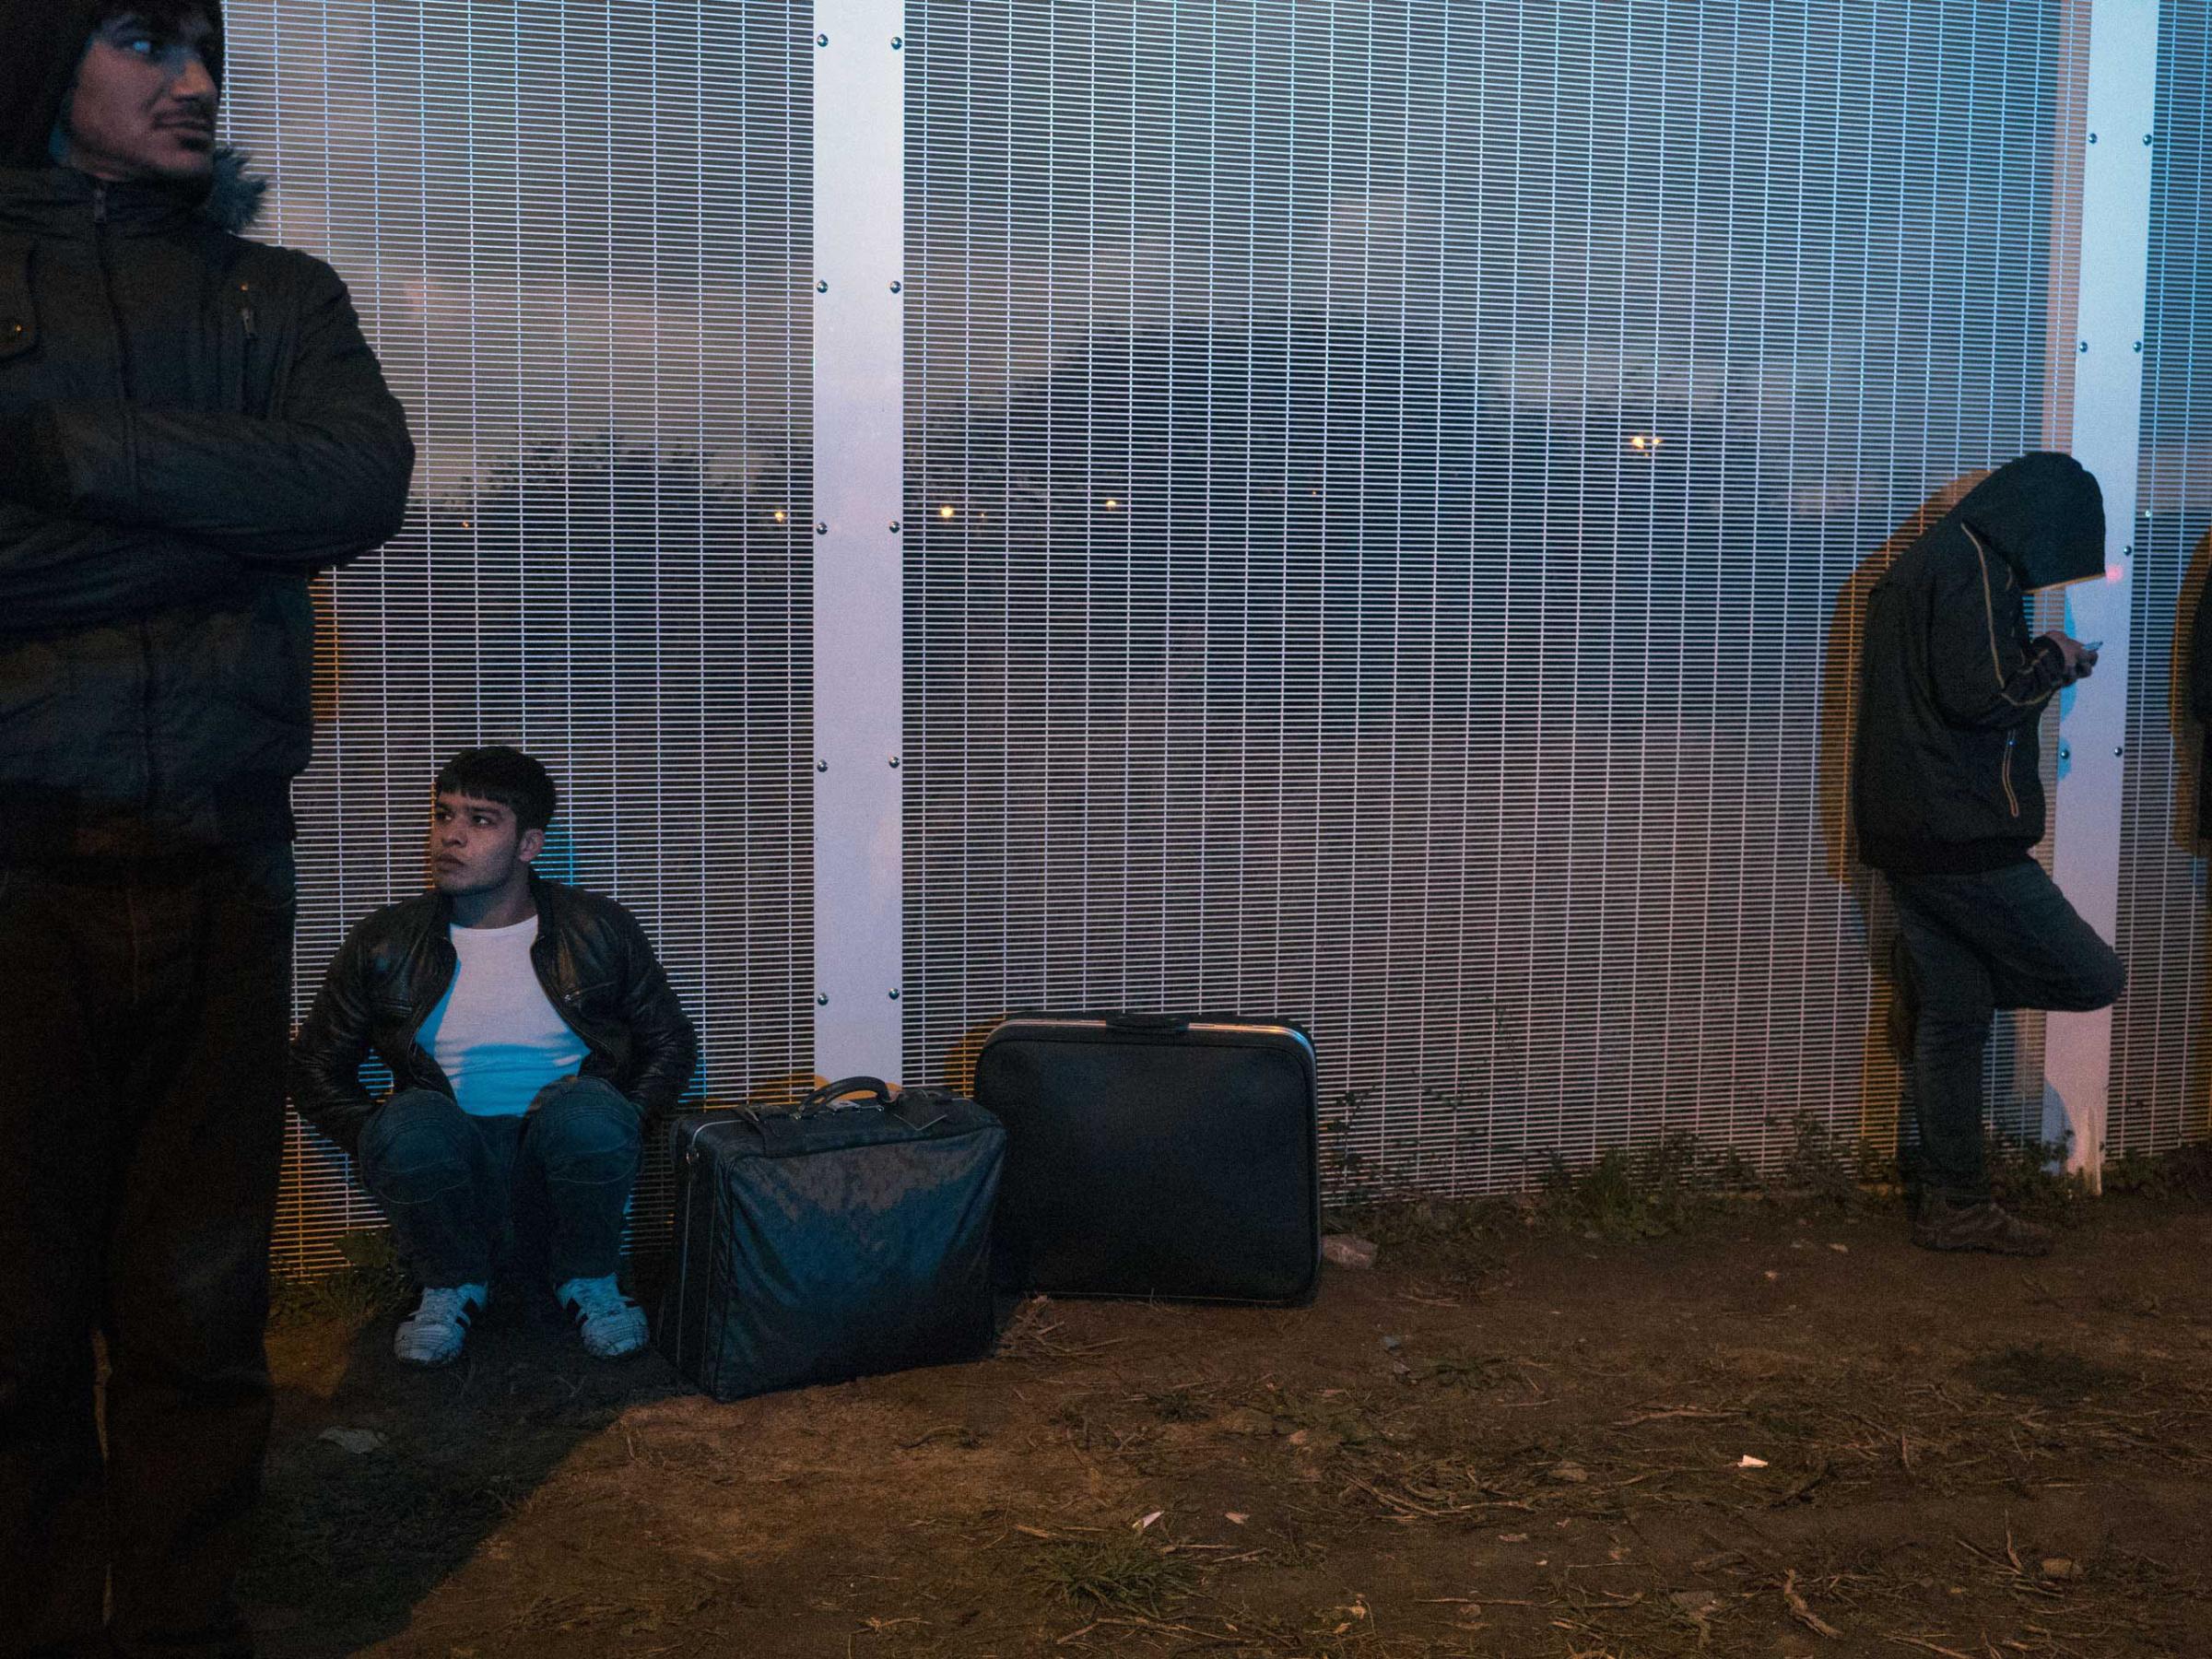 New arrivals at the entrance to the "jungle", Nov. 25, 2015, Calais, France.  The migrants who come to Calais hope to eventually make their way to the United Kingdom.